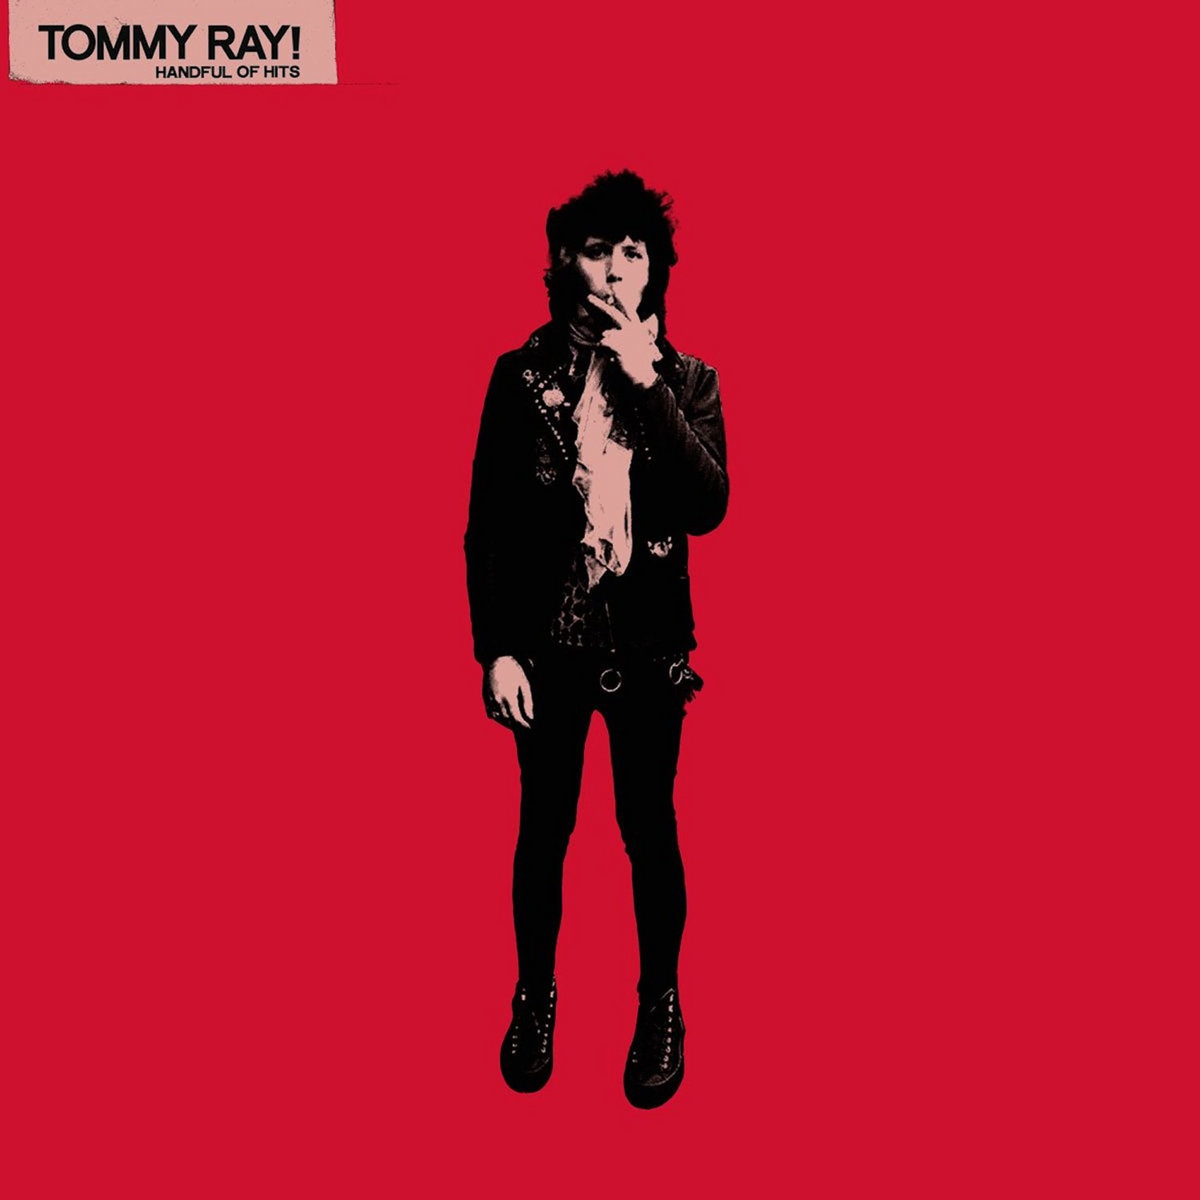 TOMMY RAY - Handful Of Hits | TOMMY RAY | Tommy Ray (&amp; The CRY!!)